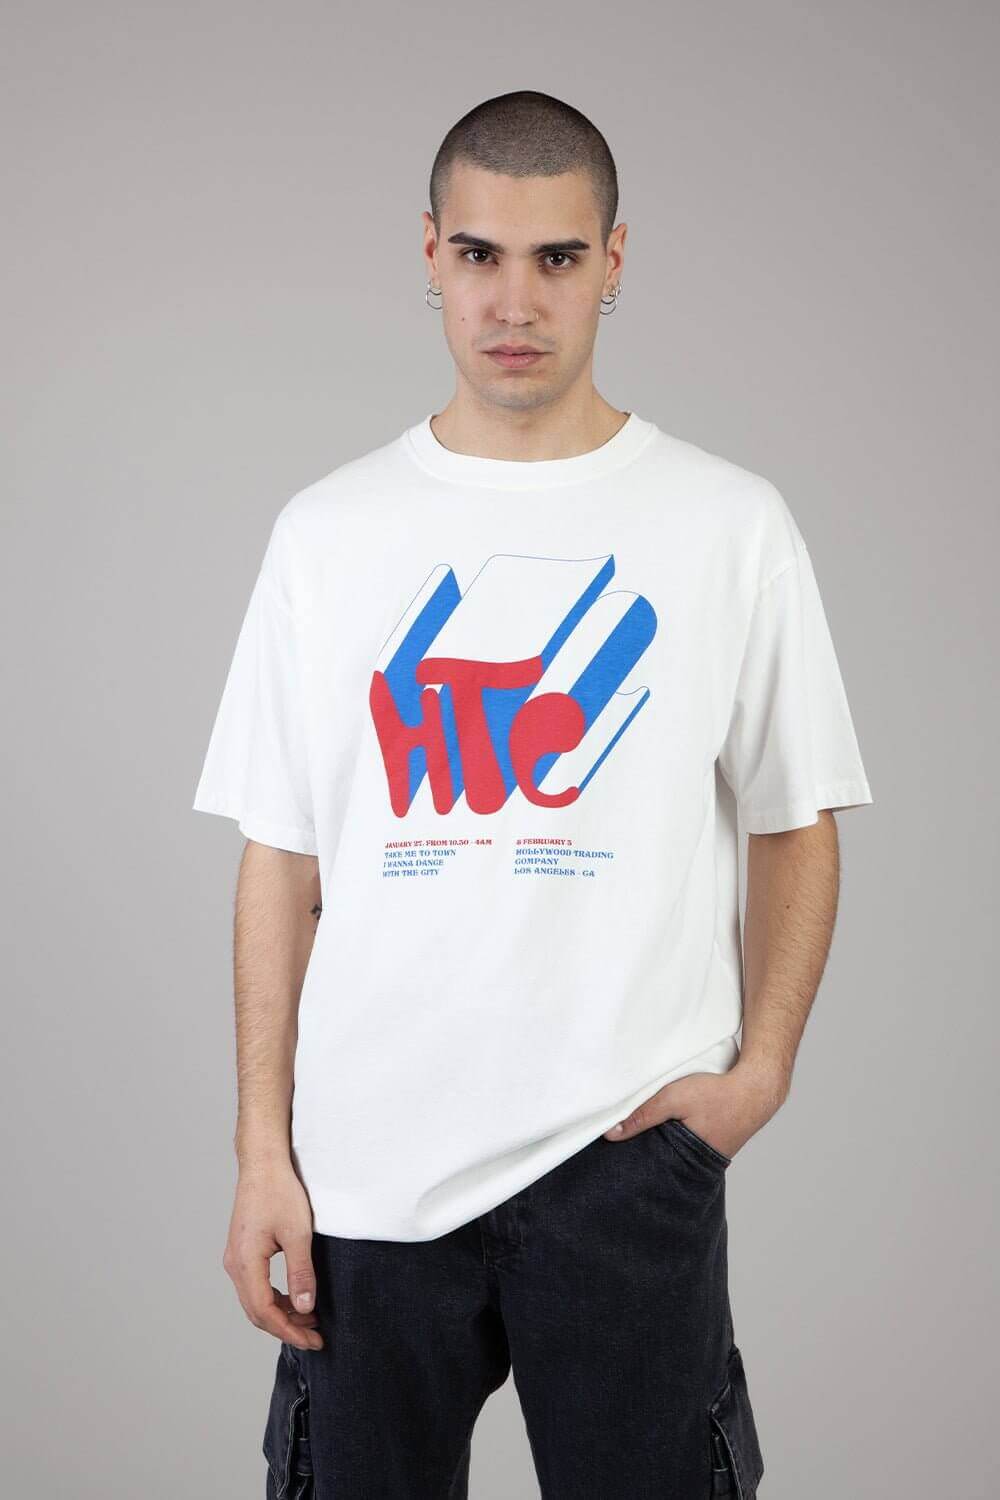 HTC 3D T-SHIRT Regular fit t-shirt with printed 3D htc logo on the front. Composition: 100% Cotton HTC LOS ANGELES